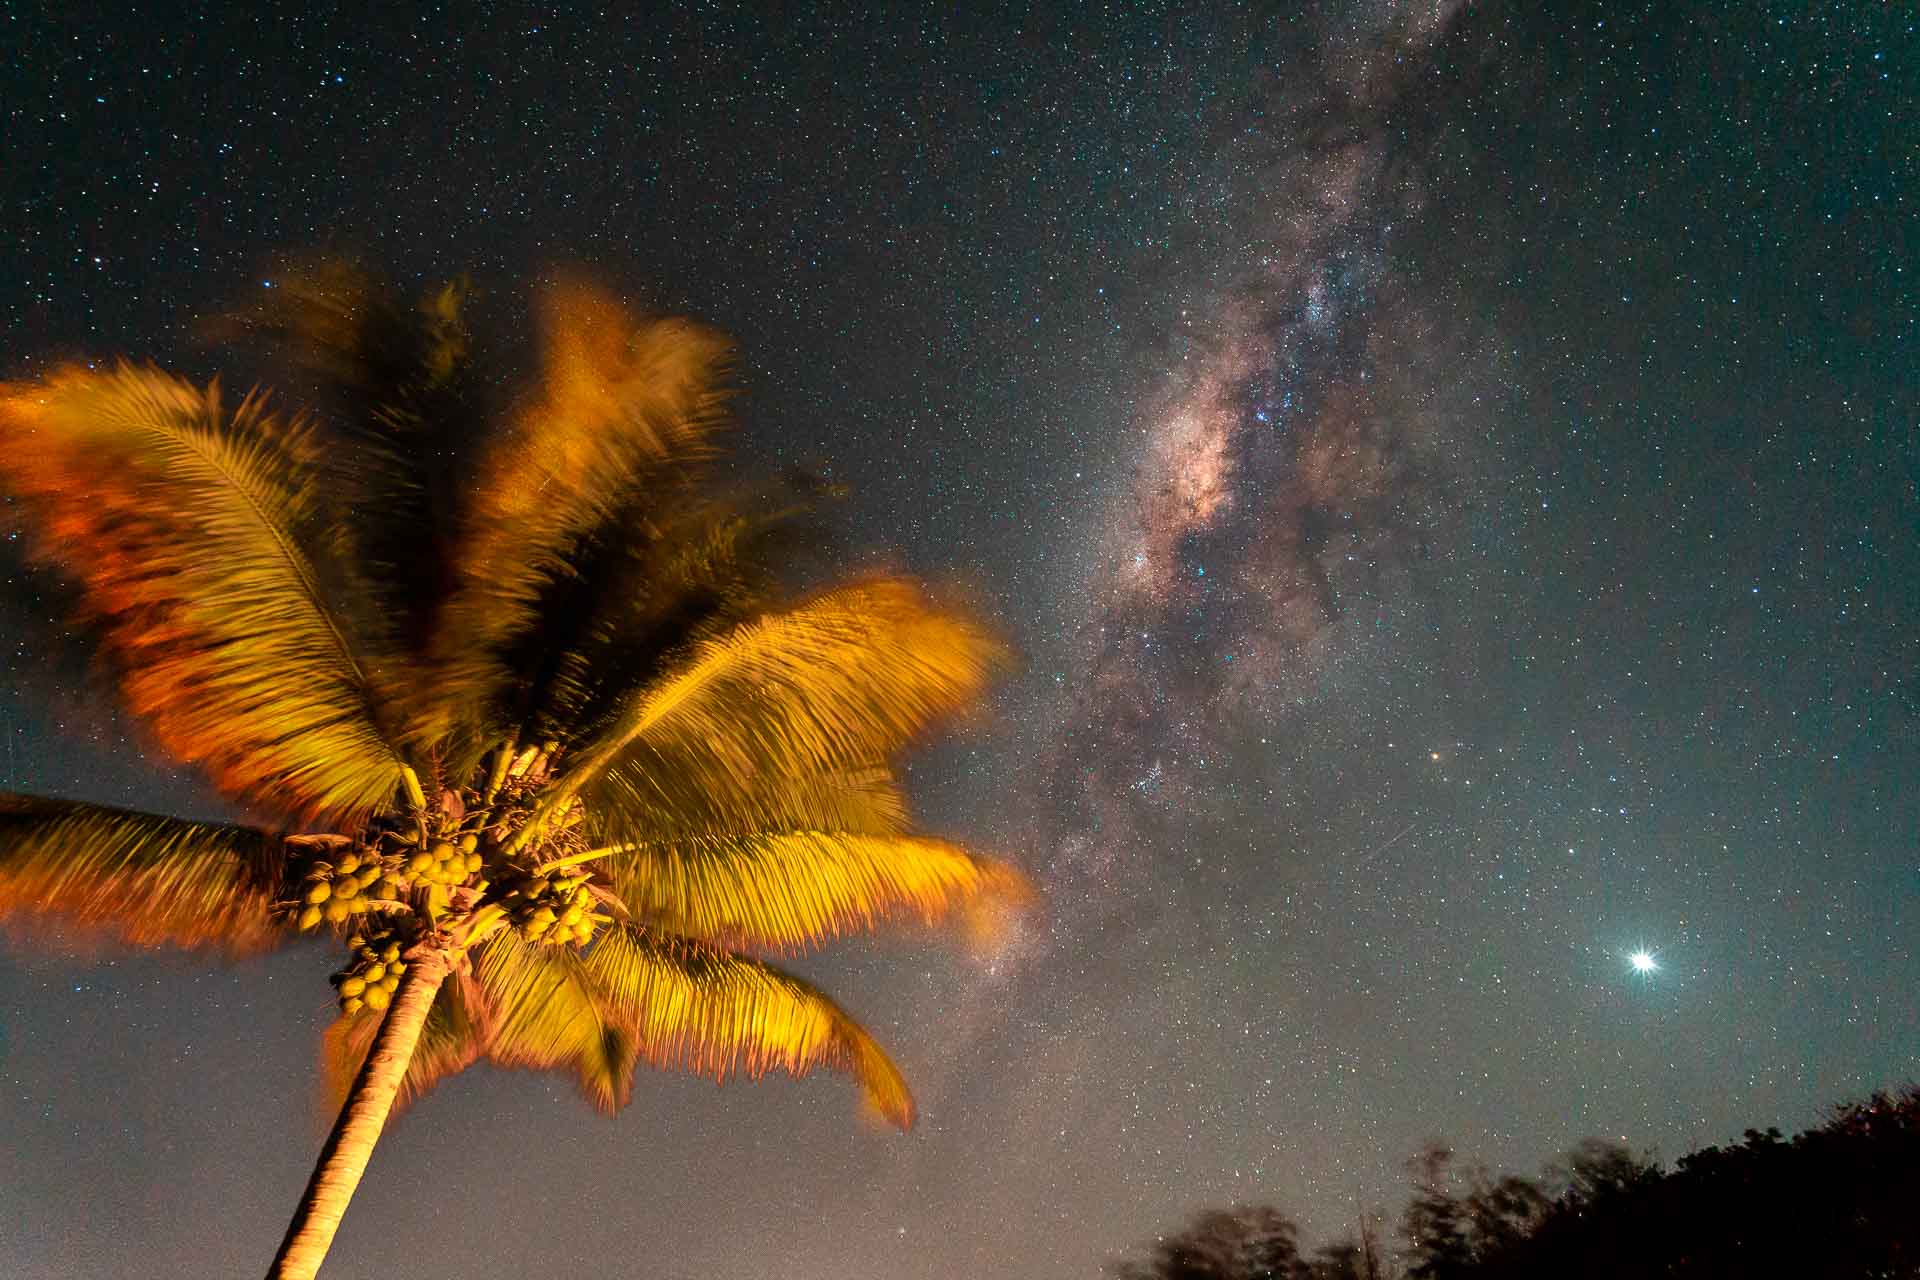 The milk way on the sky of Brazil and a coconut tree